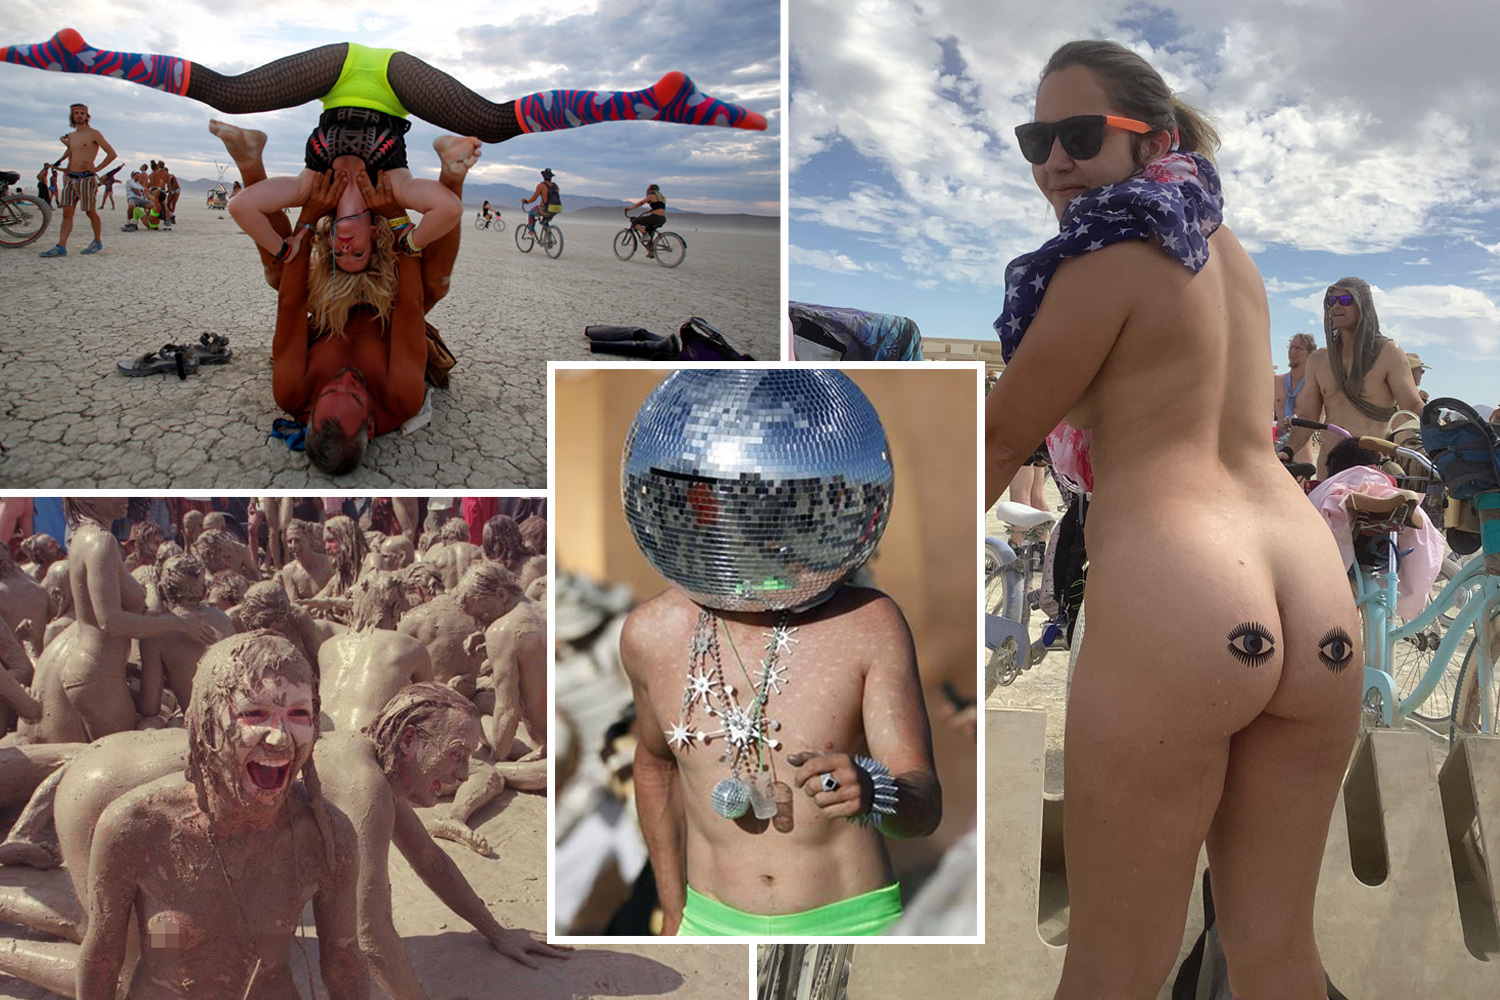 christophe chappuis recommends burning man naked pic